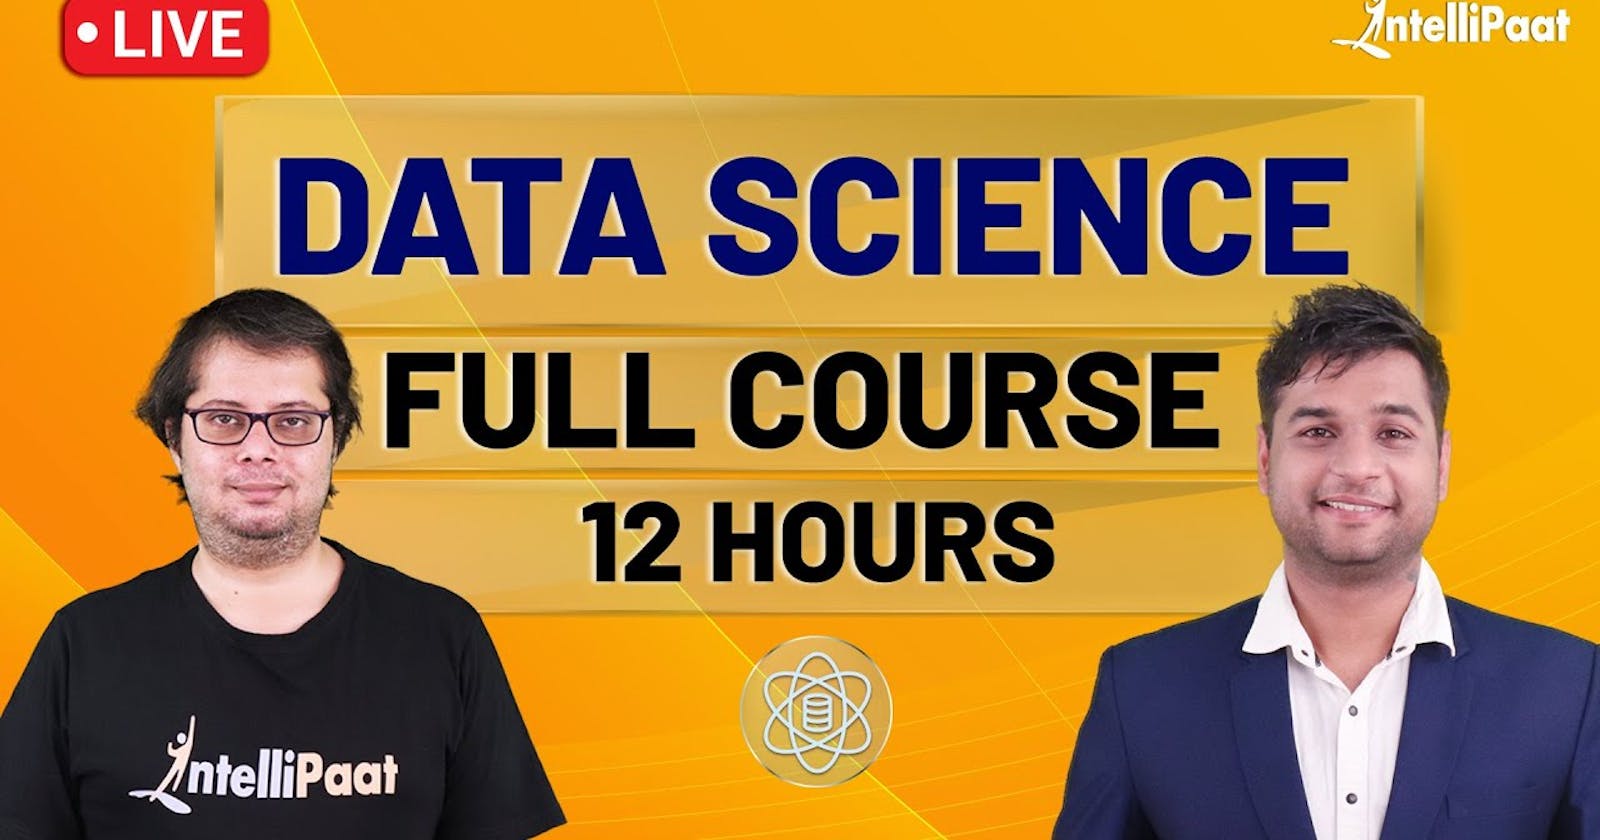 Learn Data Science anytime and anywhere